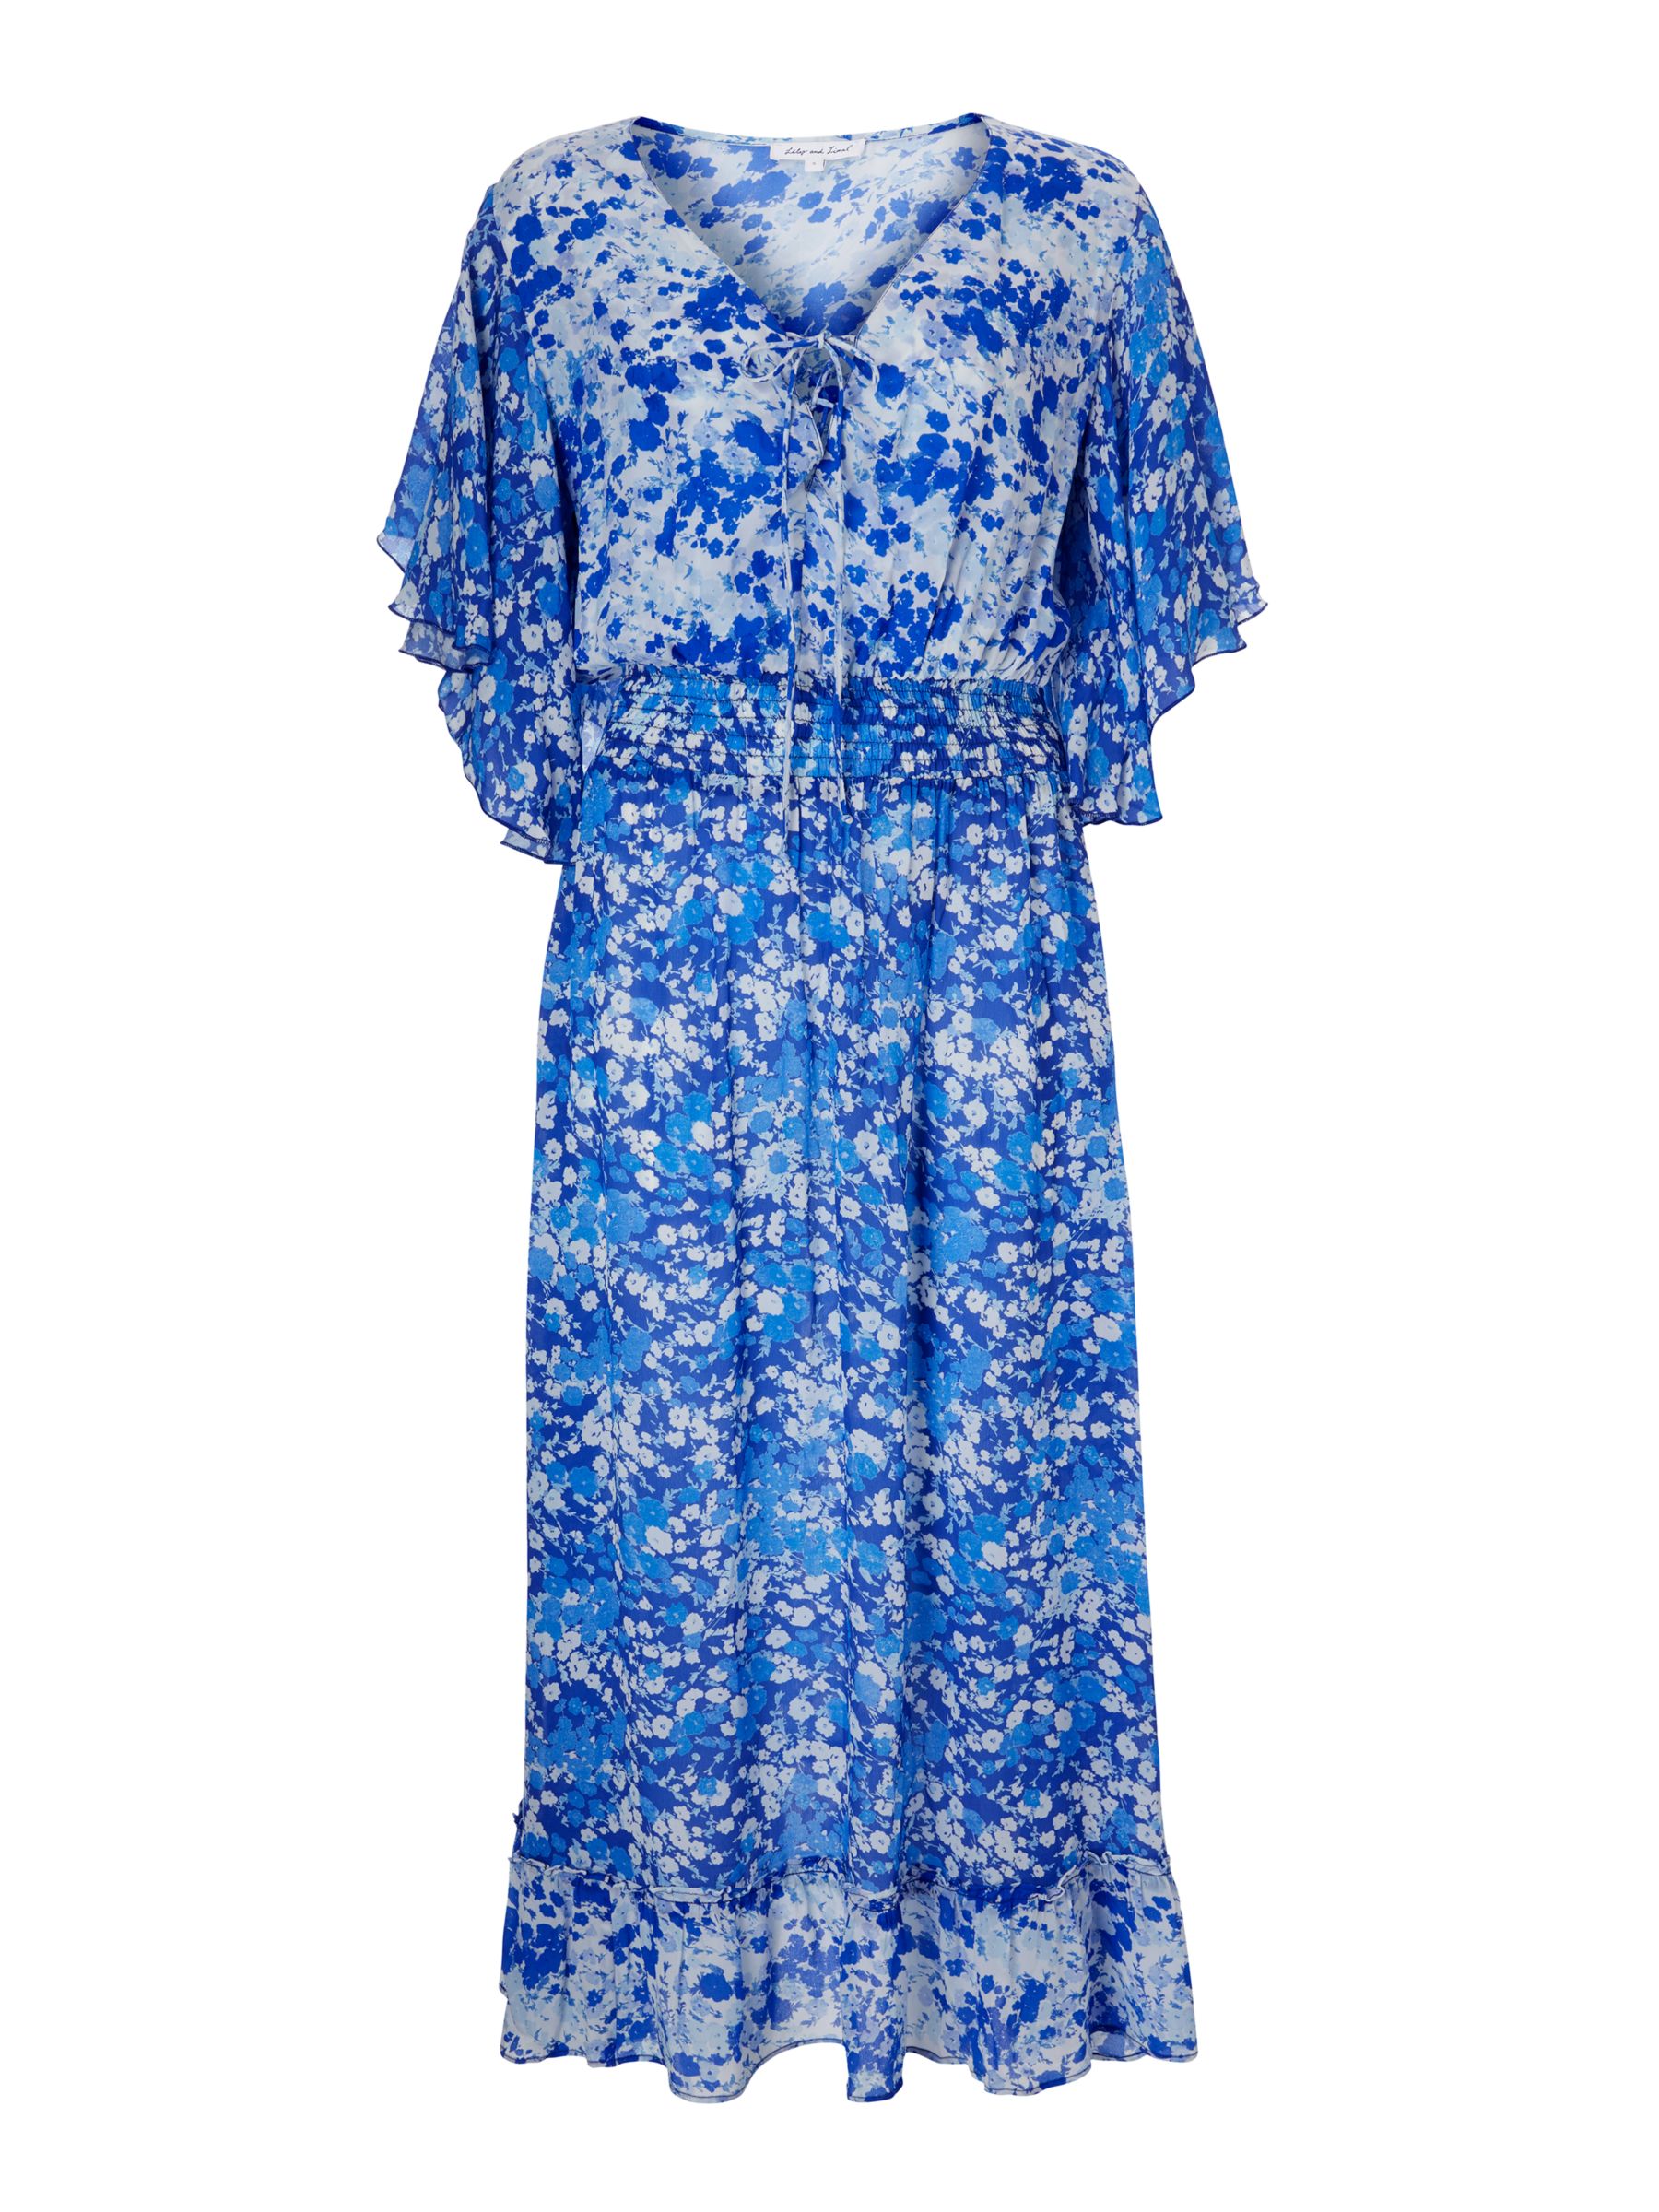 Lily and Lionel Marlowe Forget Me Knot Print Dress, Blue